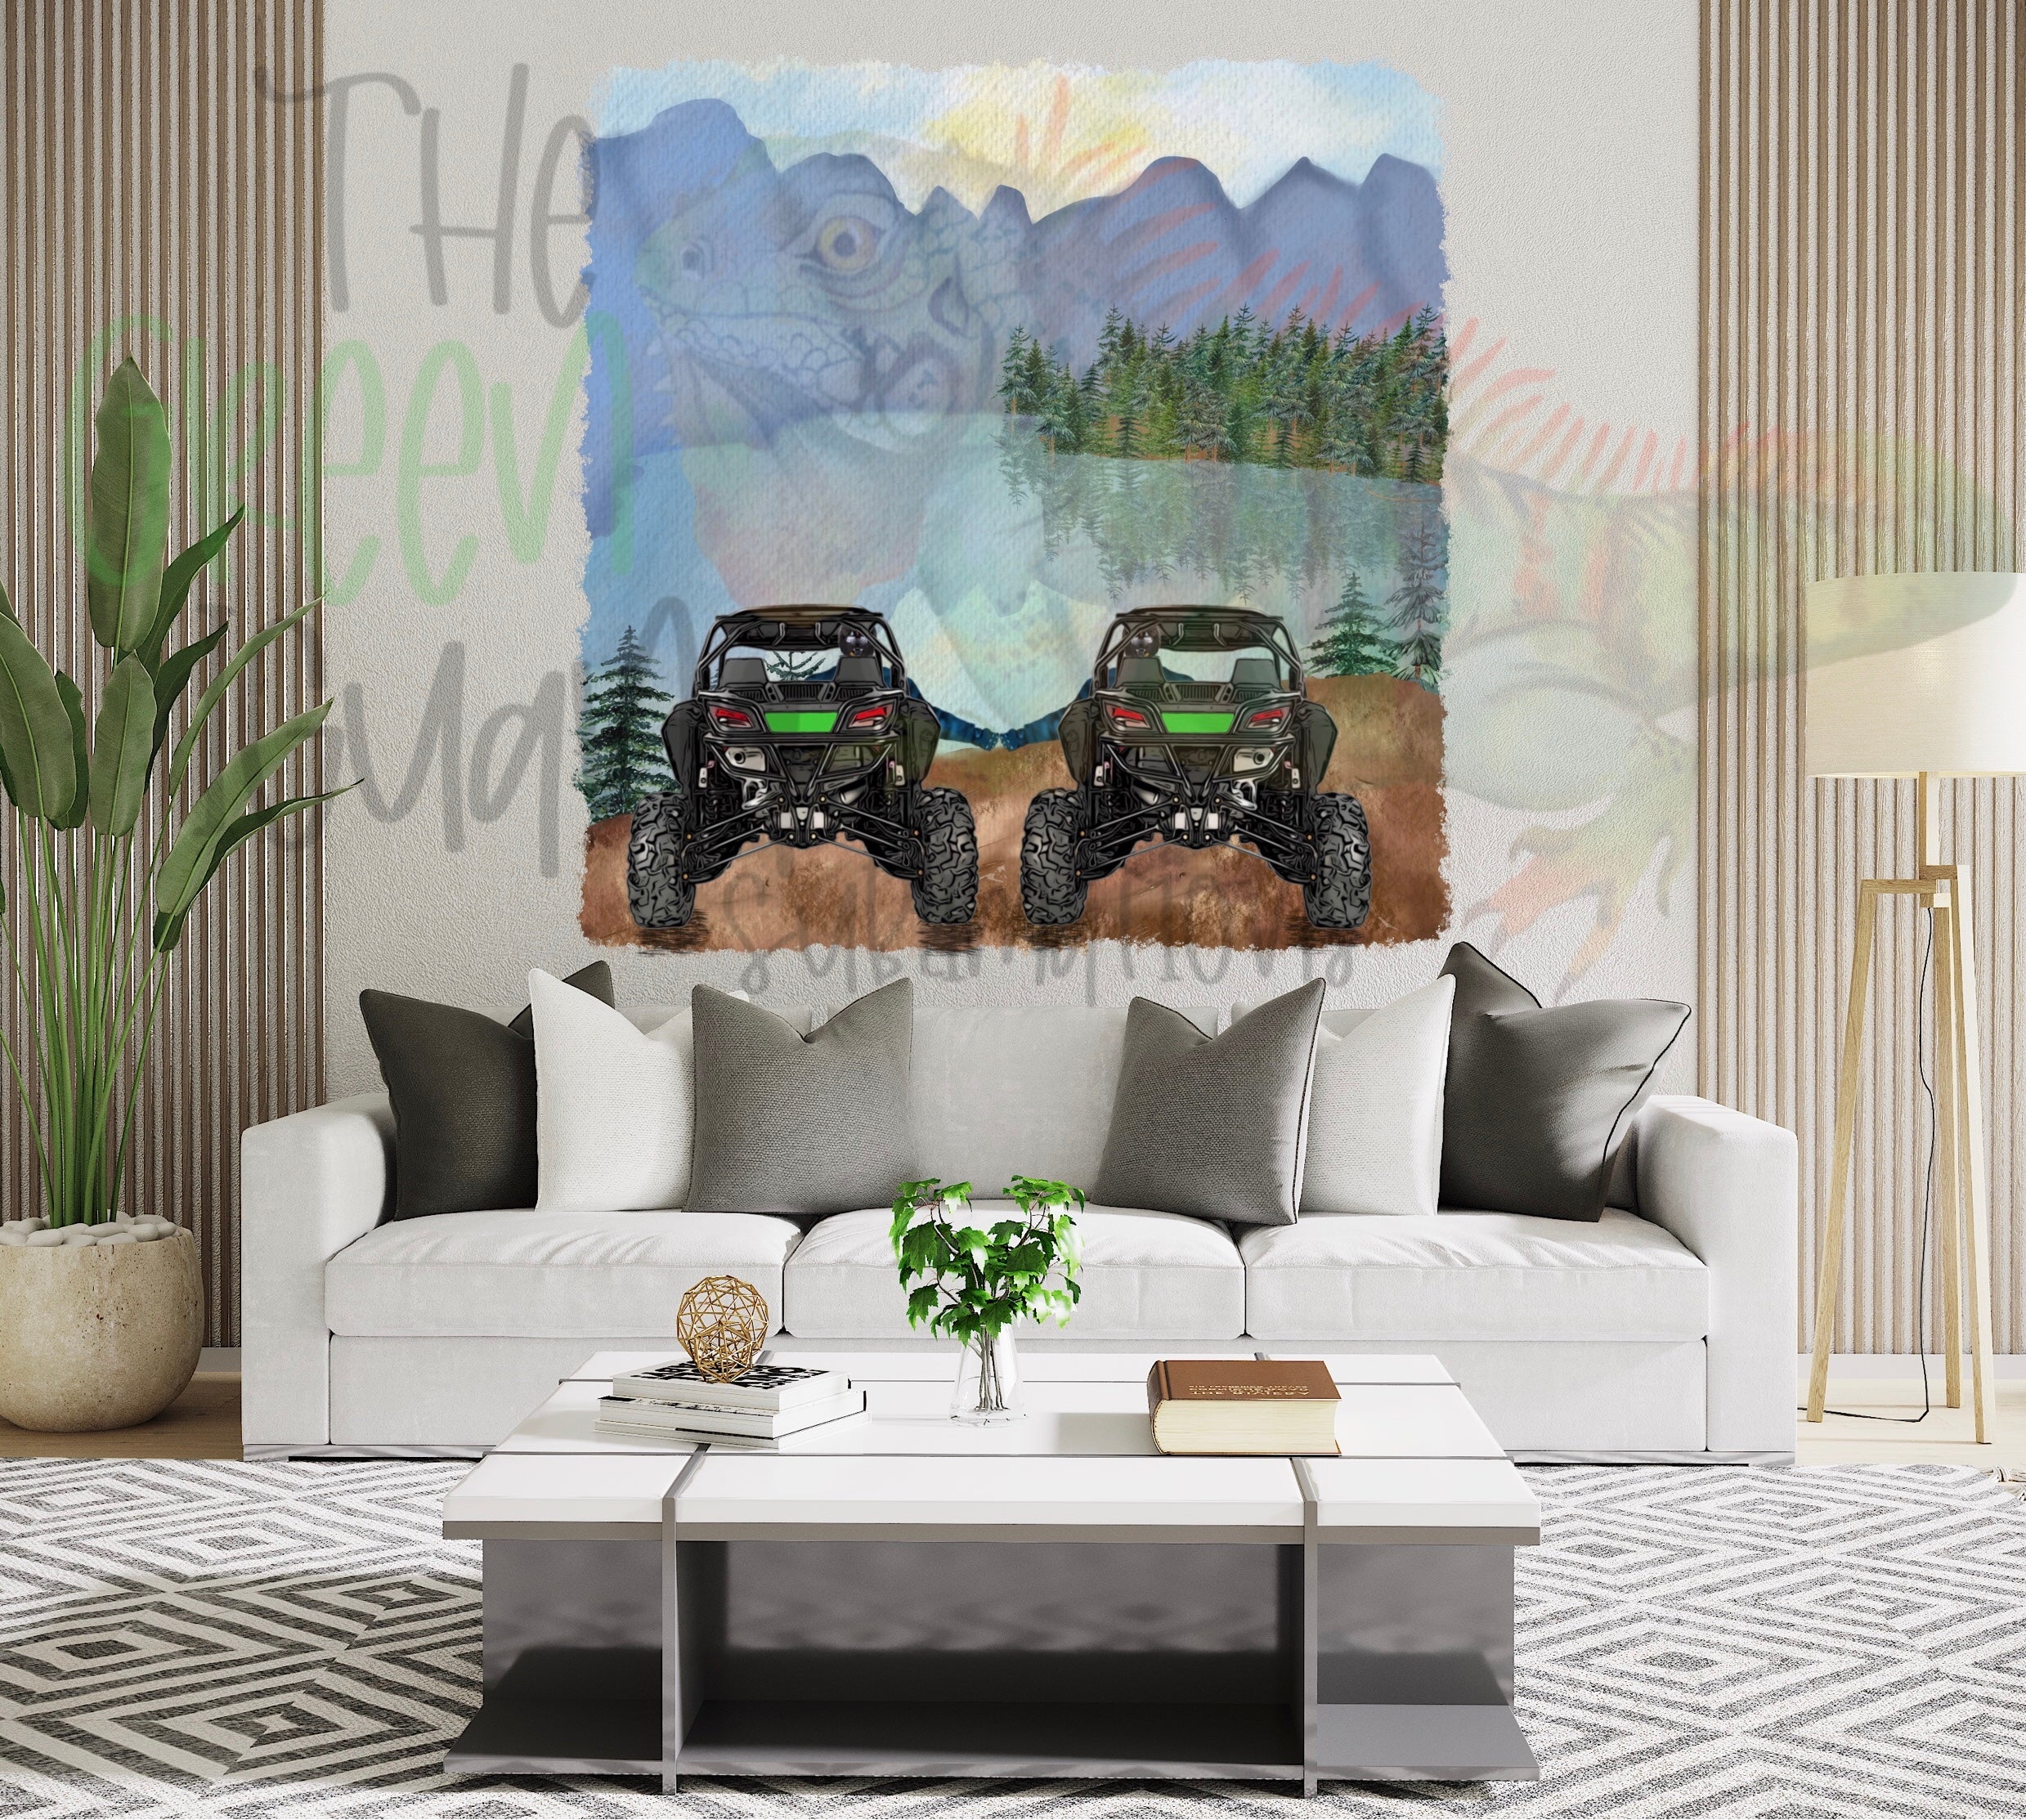 Side by side friends/couple (green) with mountain scenery DIGITAL